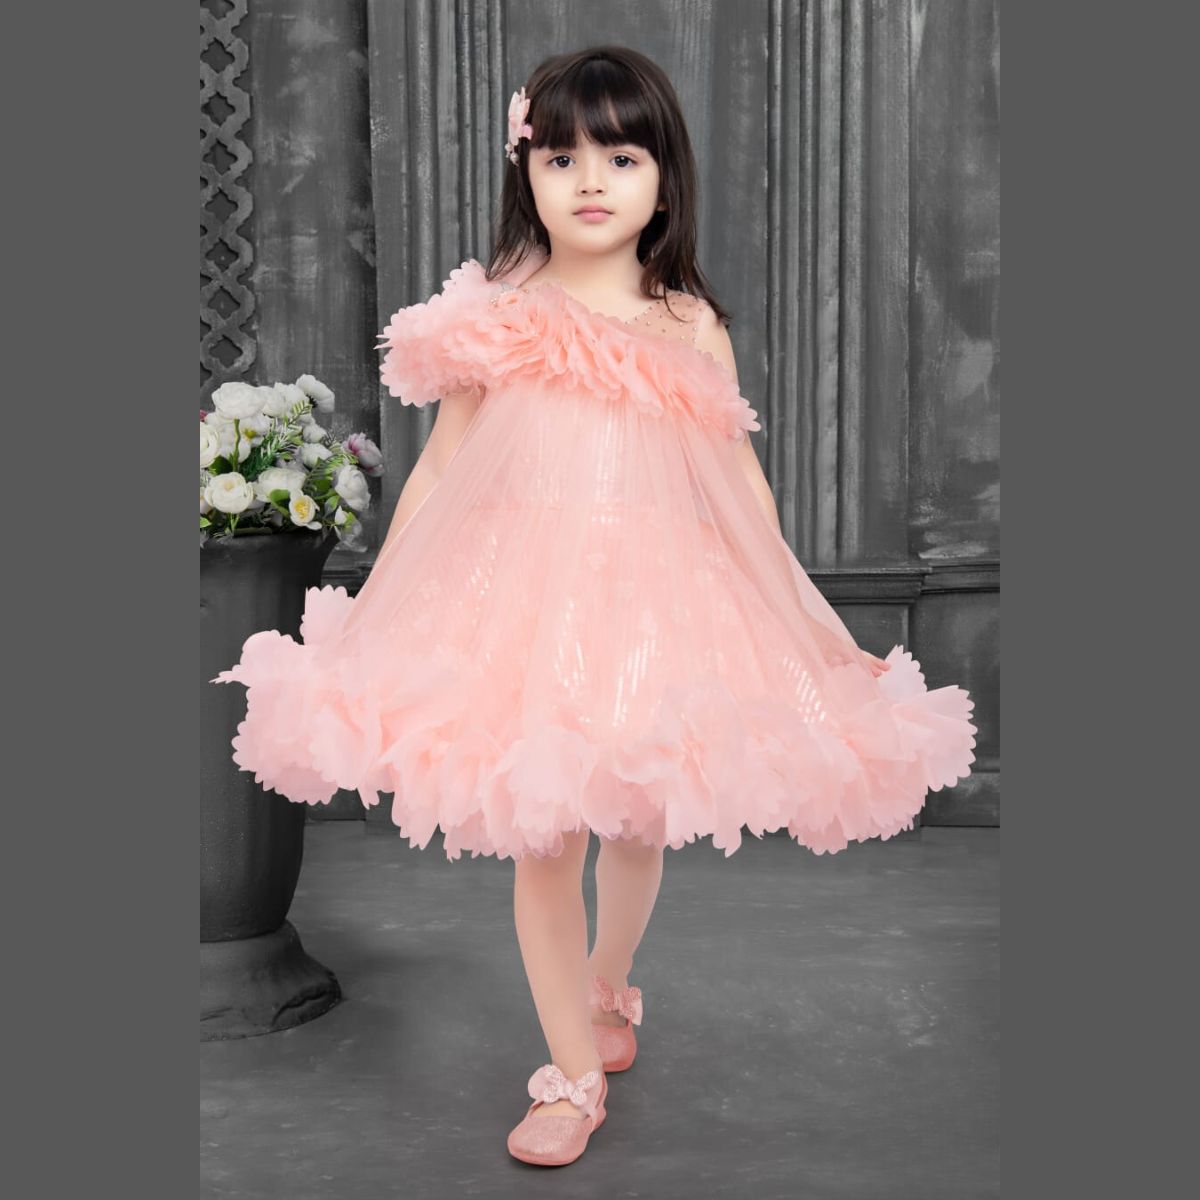 VNOTTY Fashion Trendy Net Frill Gown for Girls (5-6 Years, Blue) :  Amazon.in: Clothing & Accessories